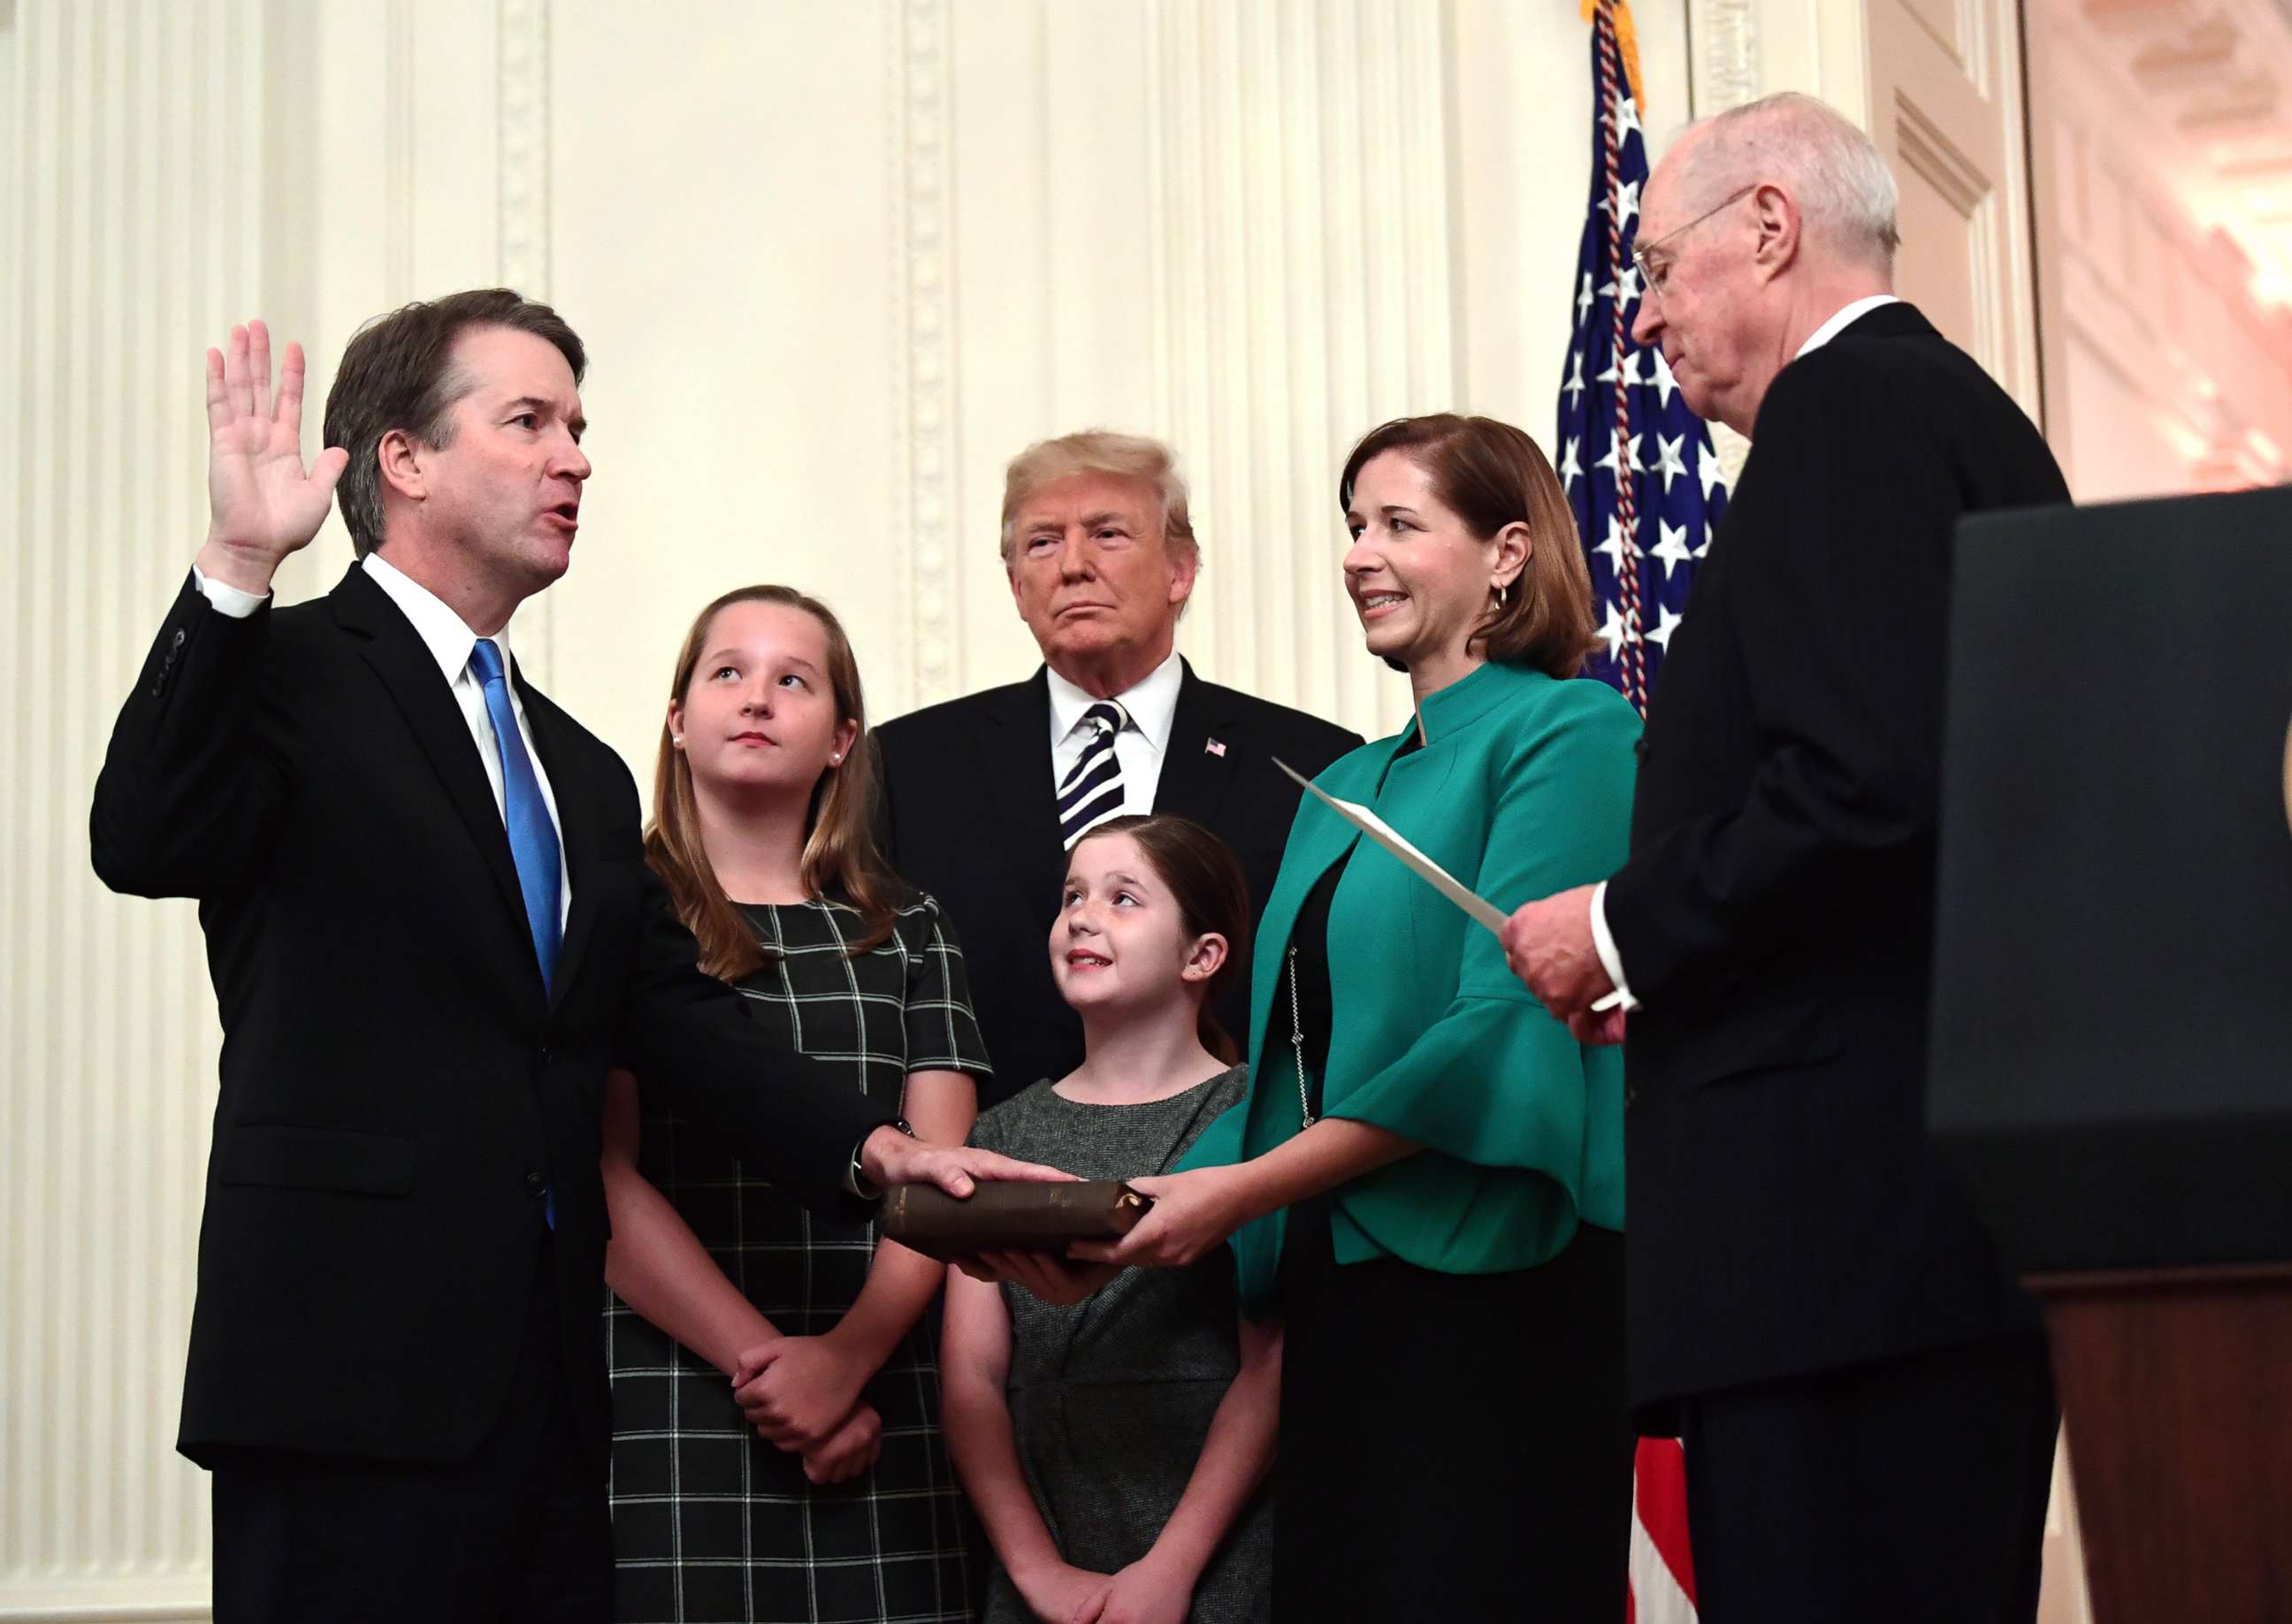 PHOTO: Retired Justice Anthony Kennedy, right, ceremonially swears-in Supreme Court Justice Brett Kavanaugh, as President Donald Trump looks on, in the East Room of the White House, Oct. 8, 2018.